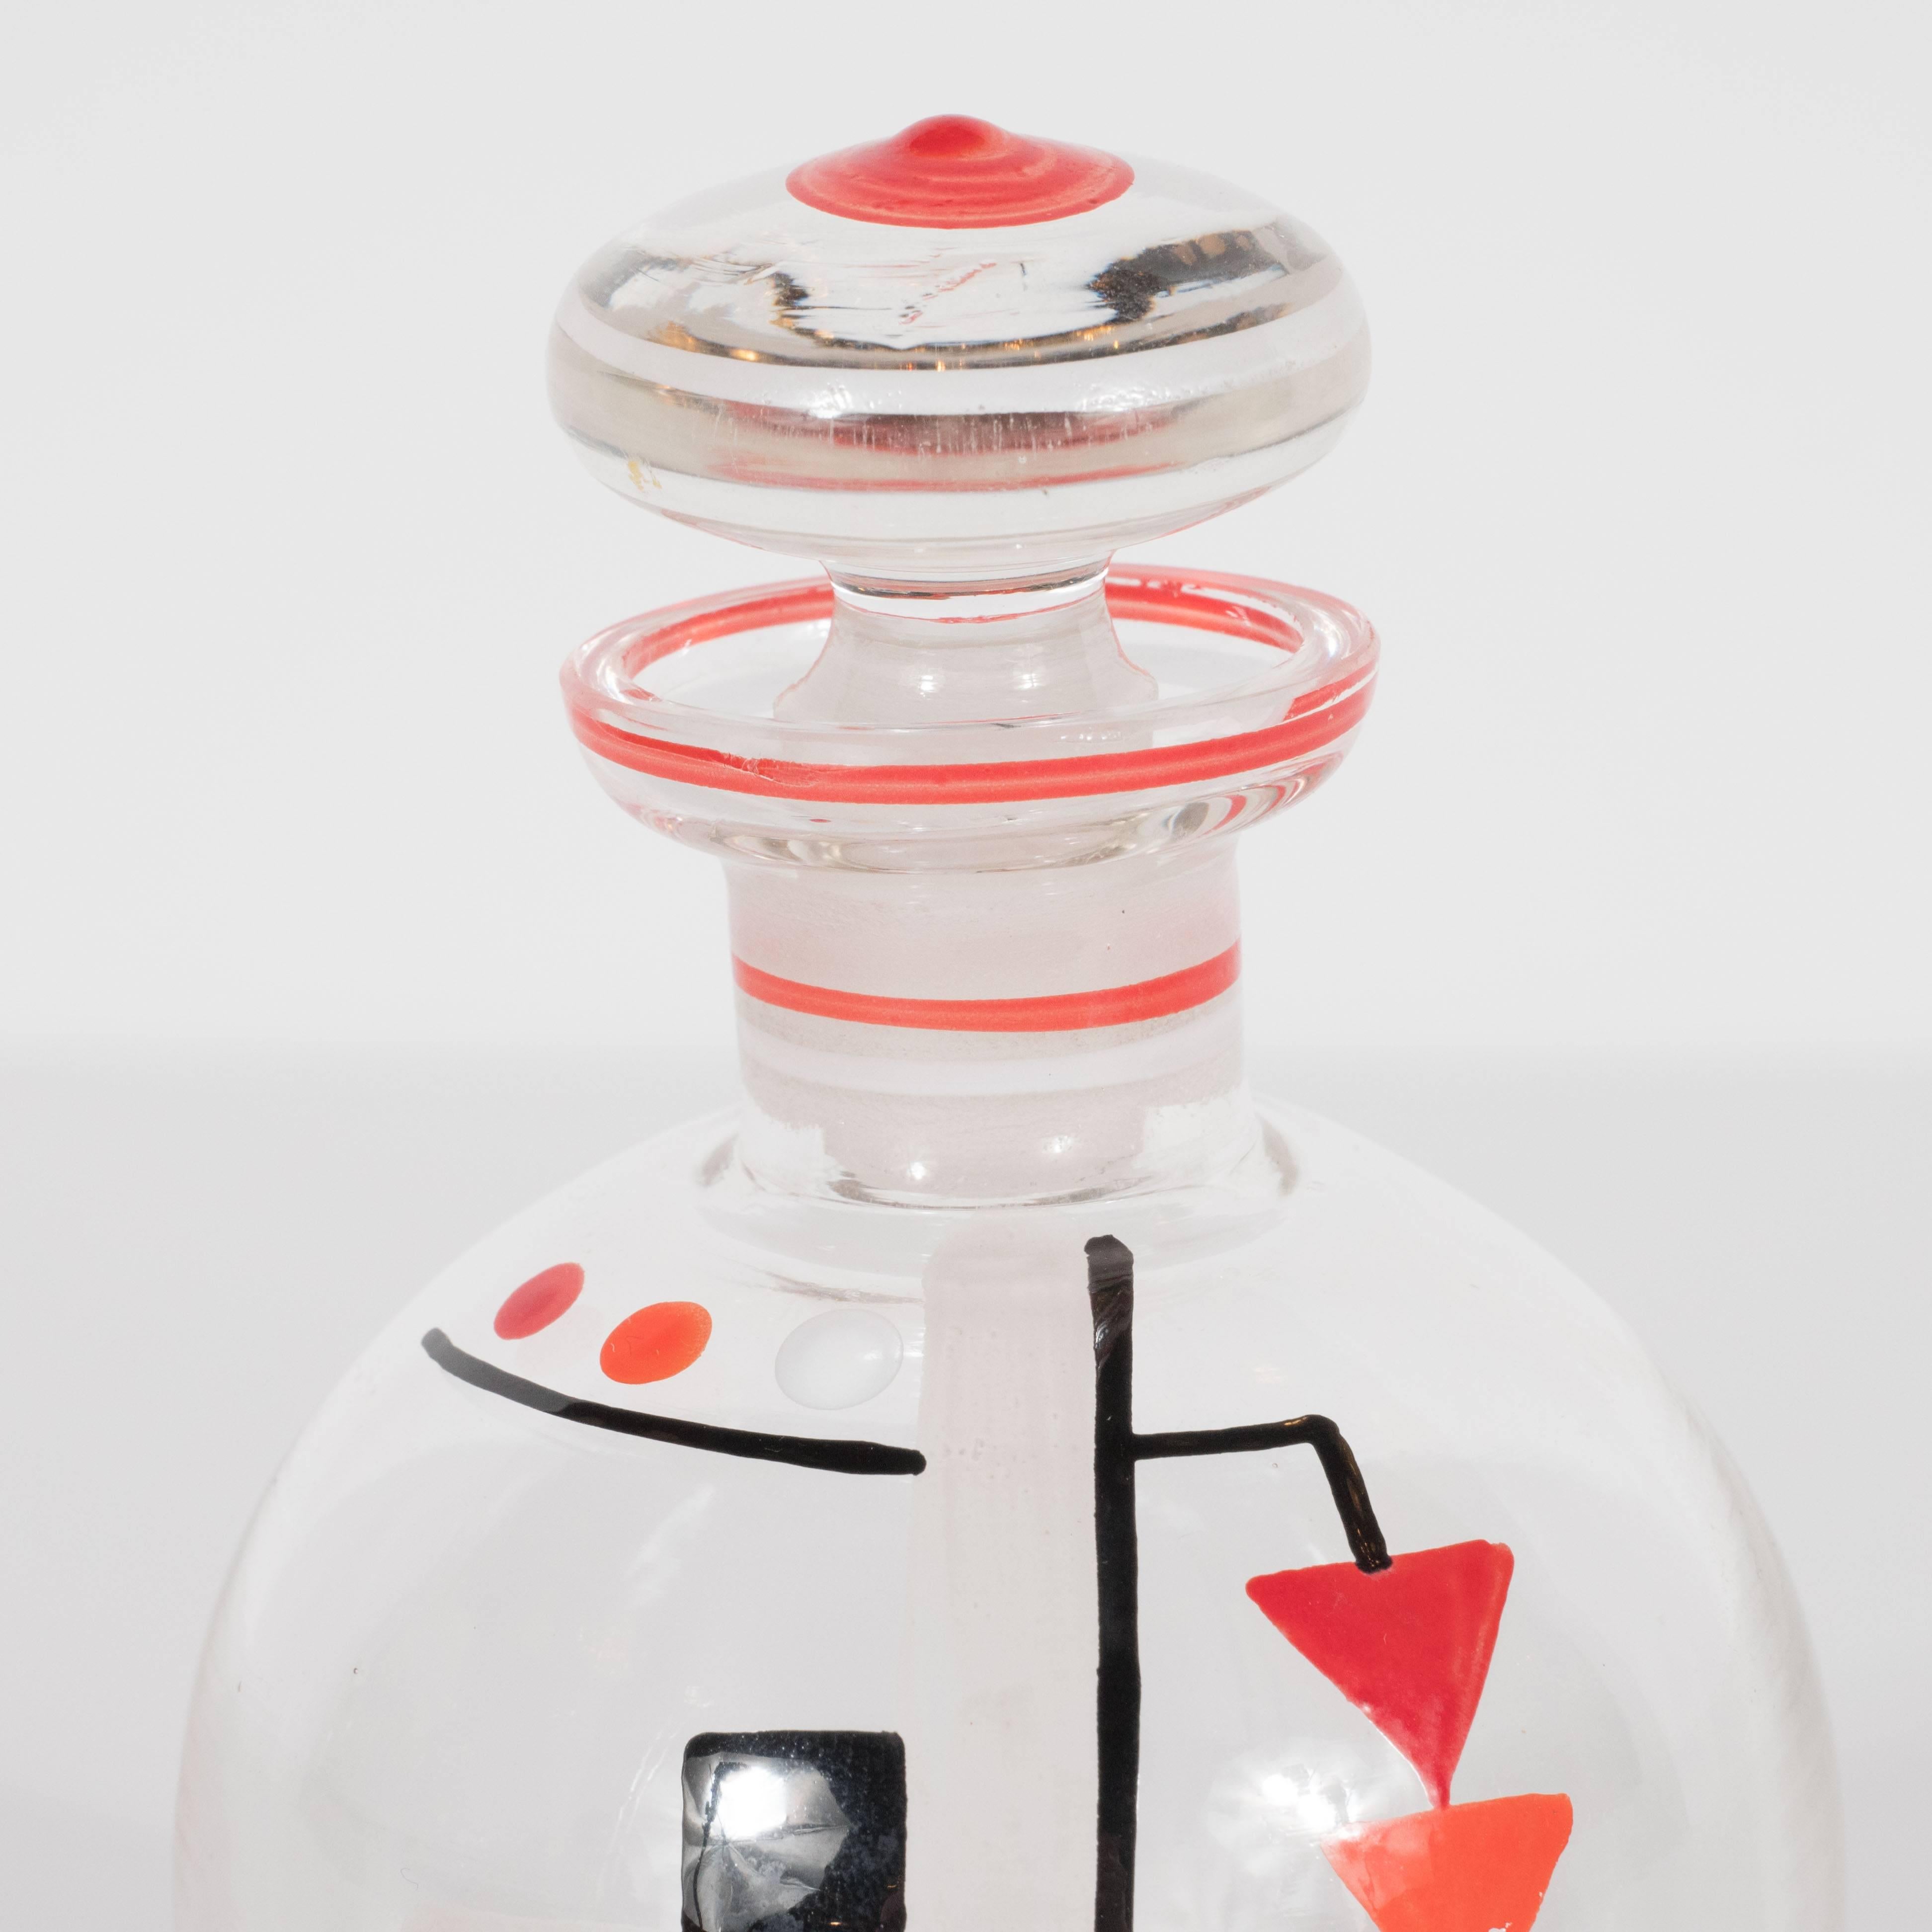 Mid-20th Century Art Deco Perfume Bottle with Hand-Painted Constructivist Geometric Forms